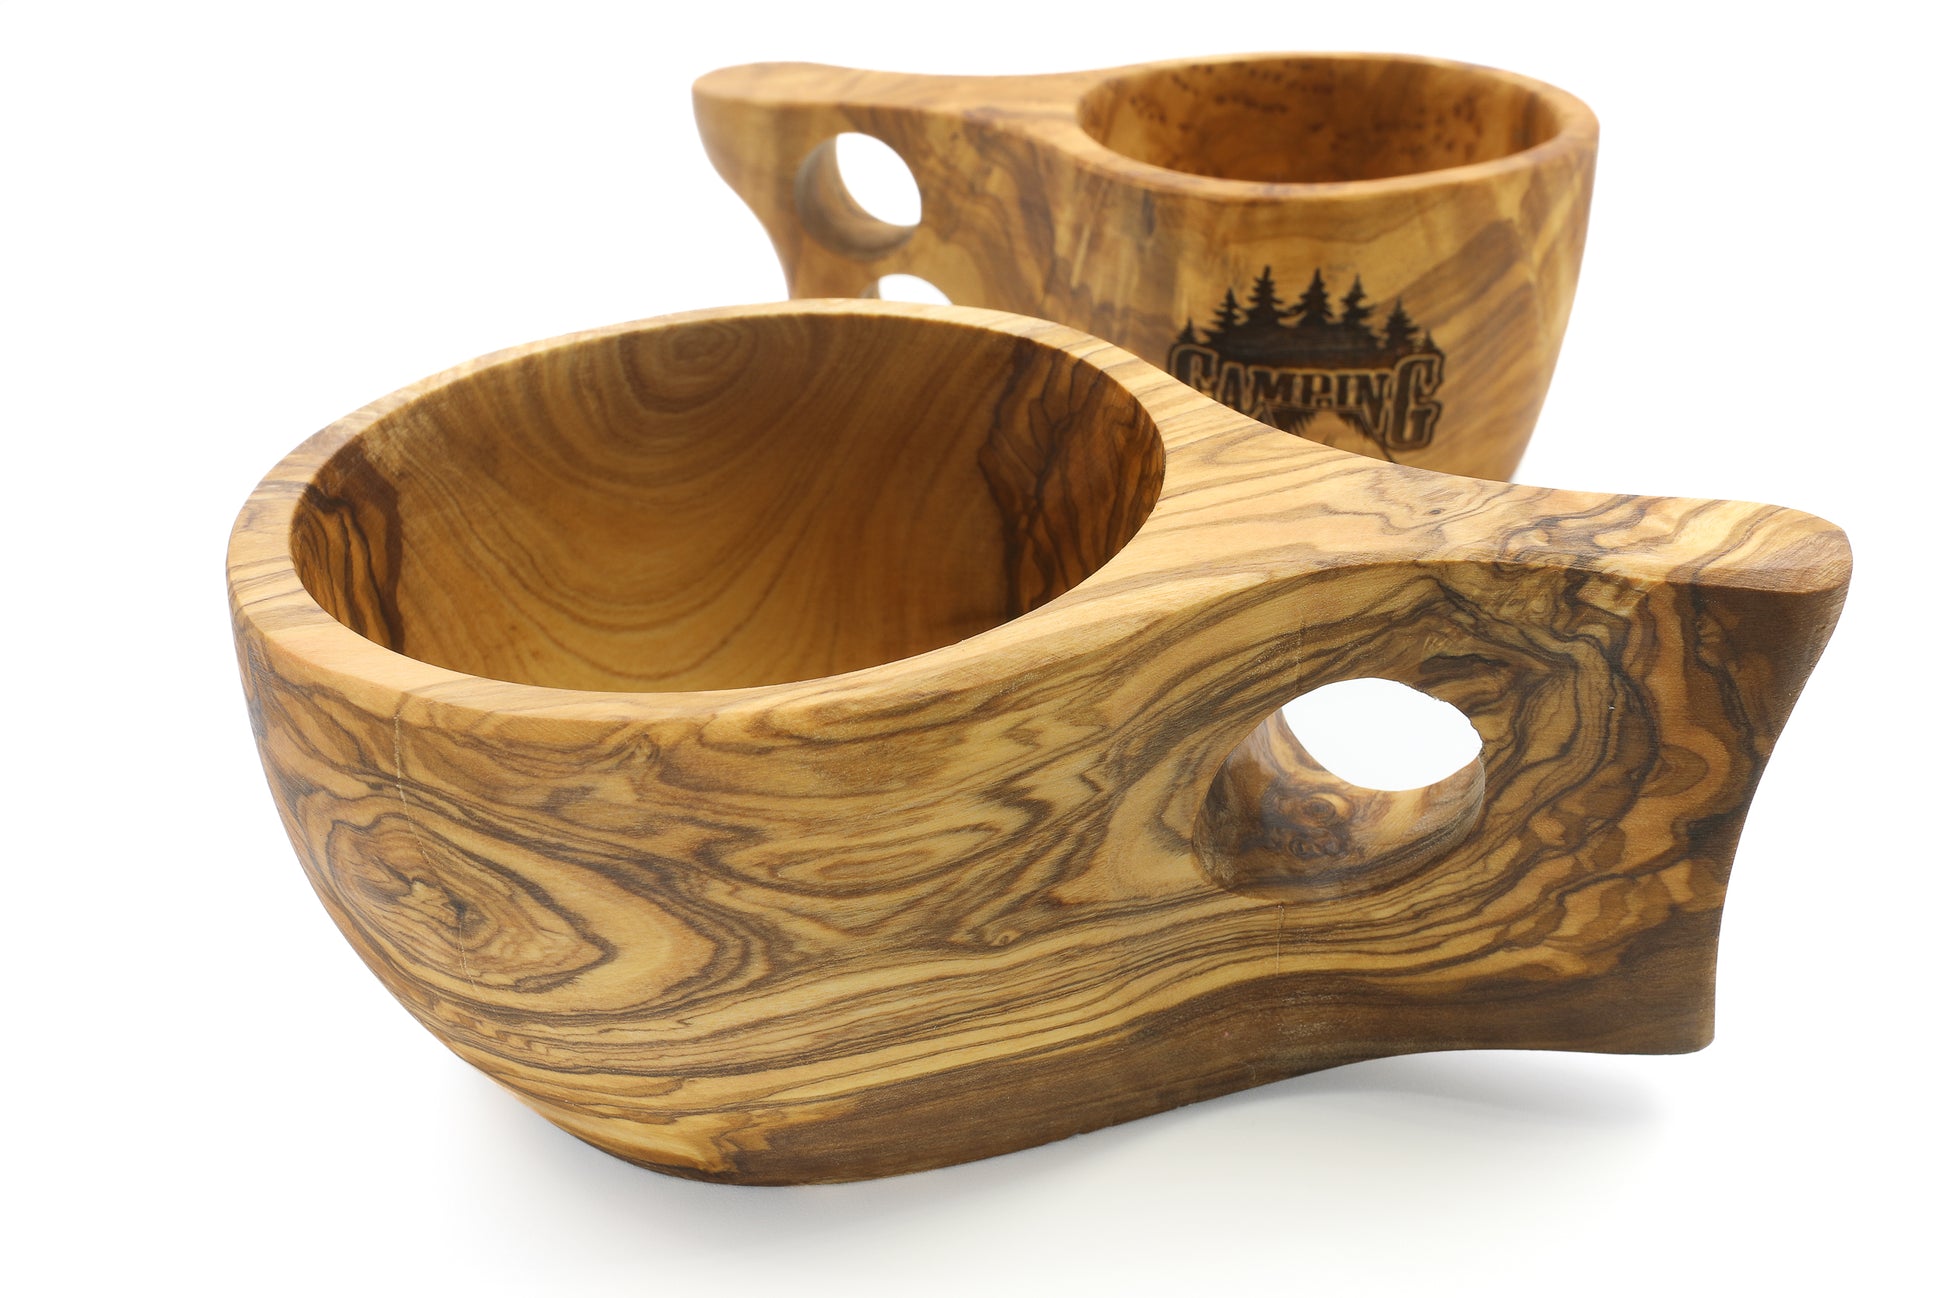 Artisan-crafted olive wood drinkware for a touch of Nordic charm